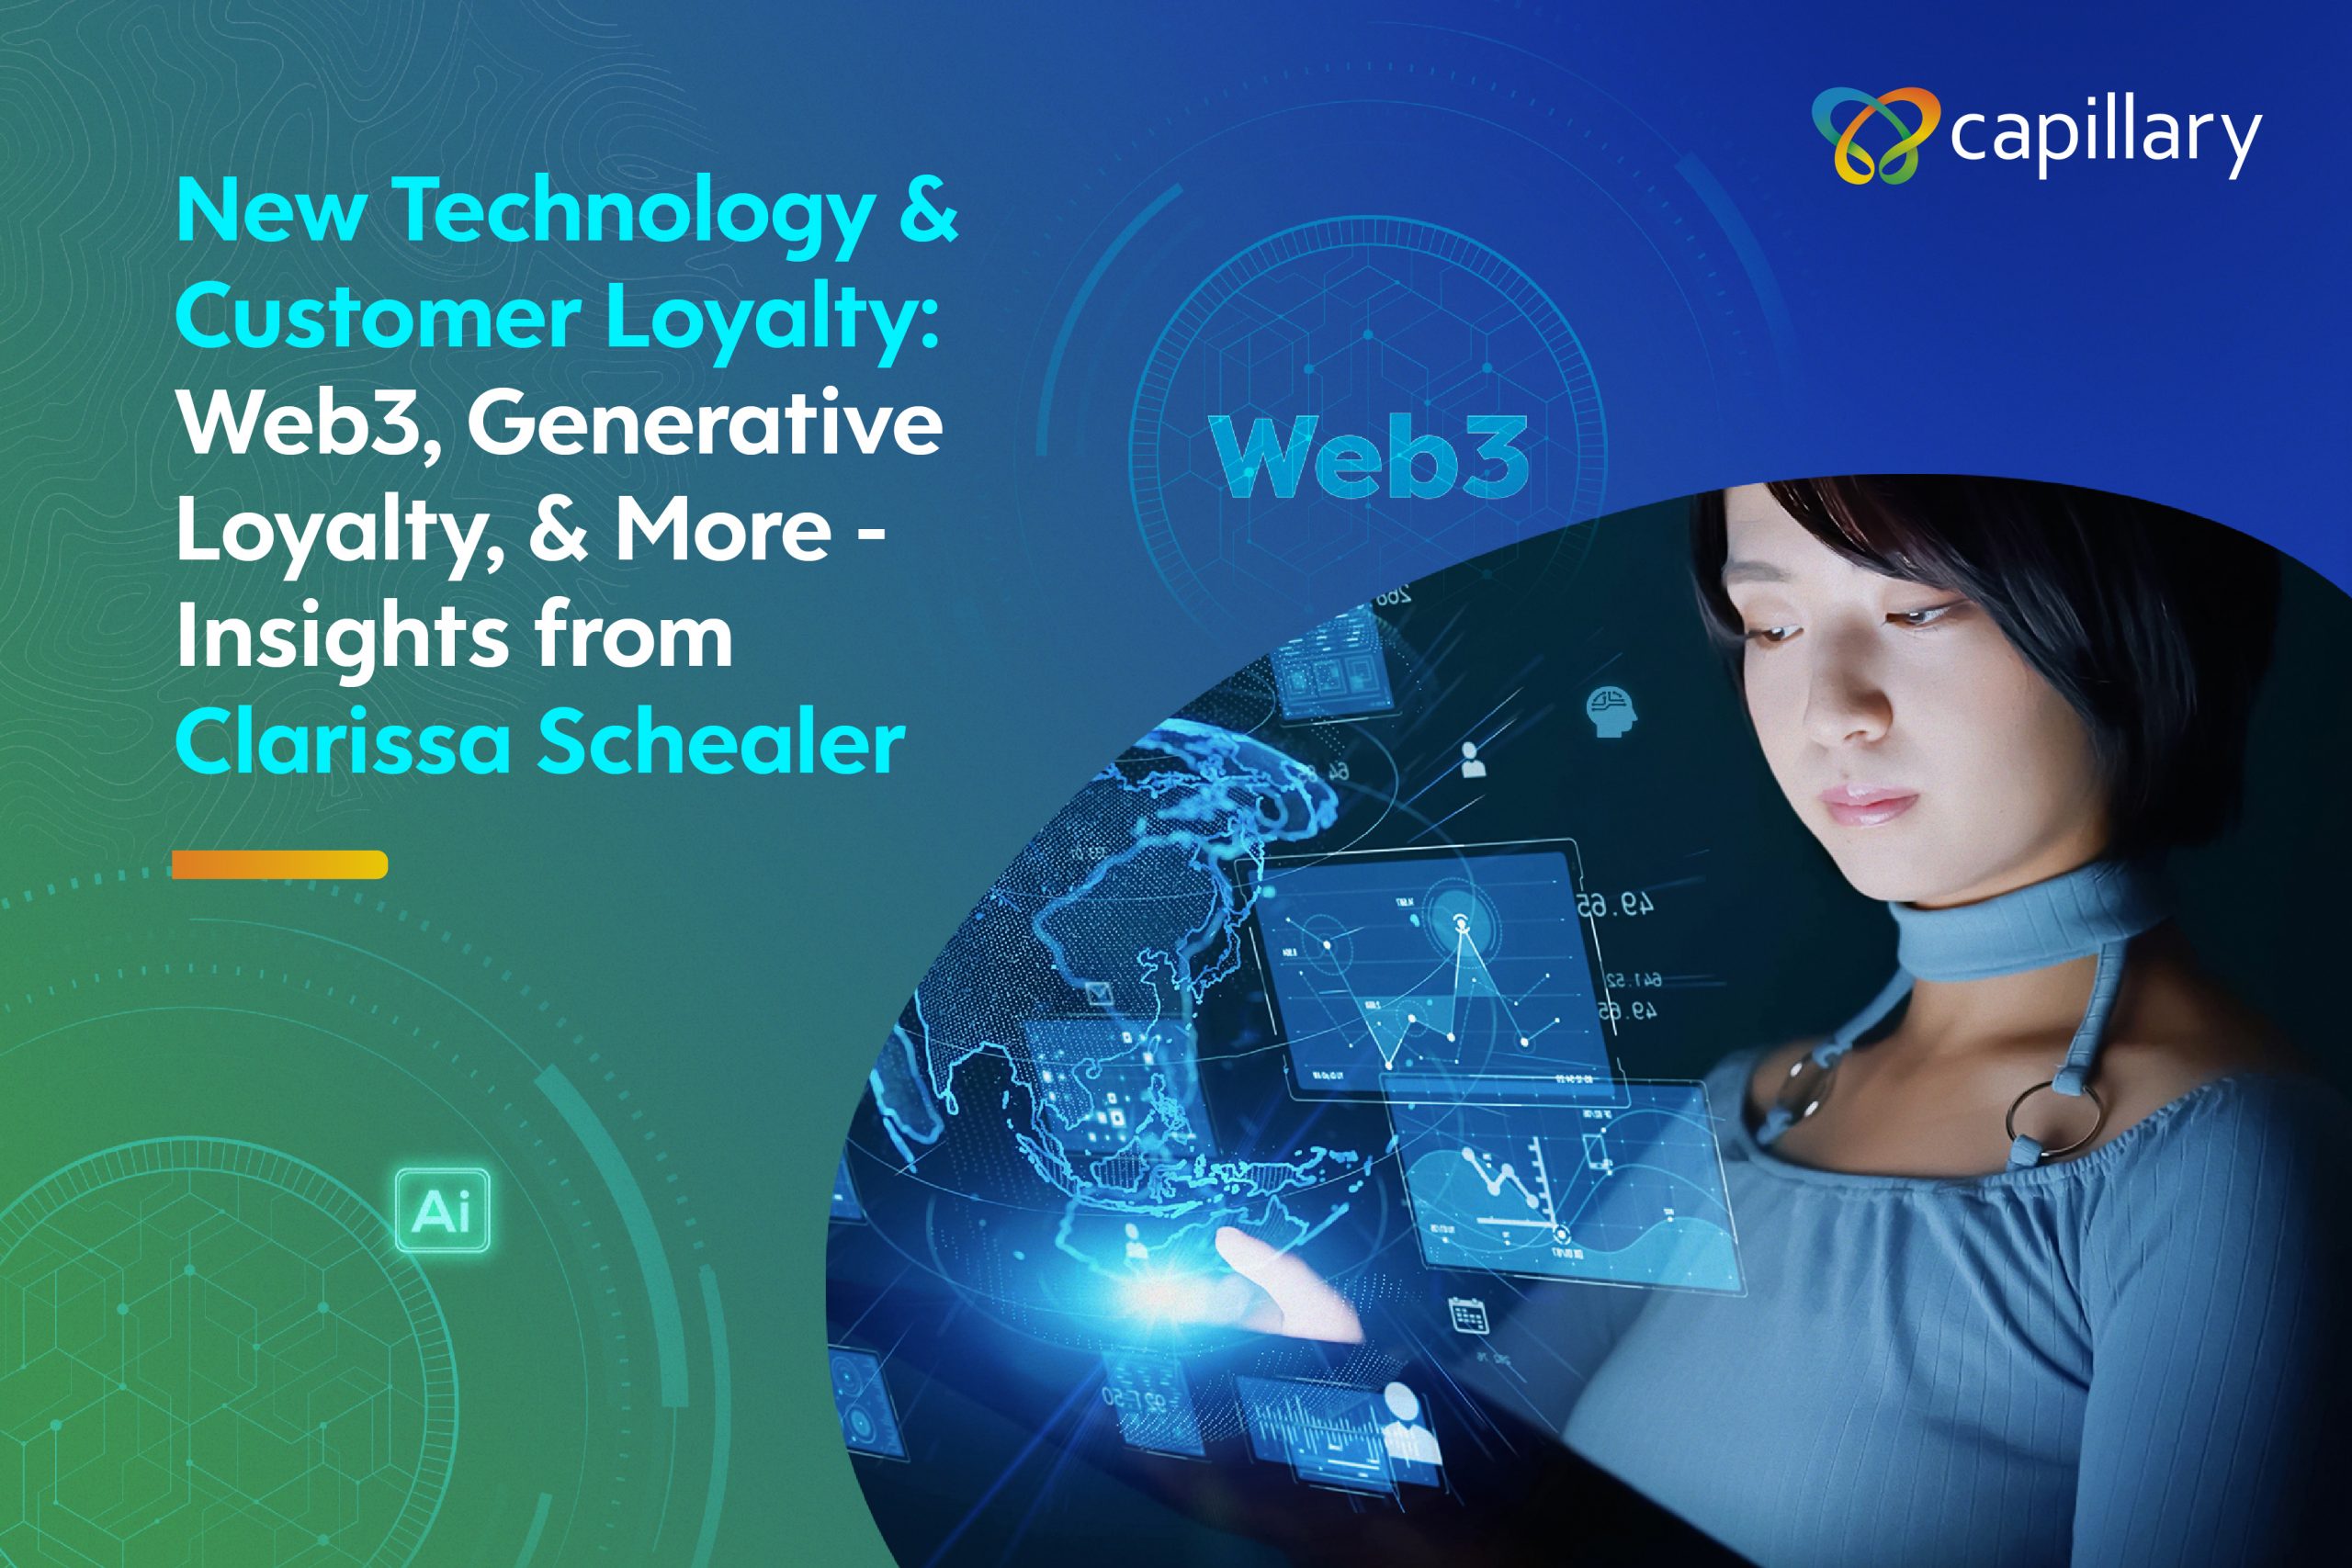 Clarissa Schealer presents on 'New Technology & Customer Loyalty: Web3, Generative Loyalty, & More' with digital interfaces and AI symbols overlaying her image, representing the blend of technology and personalized customer engagement.